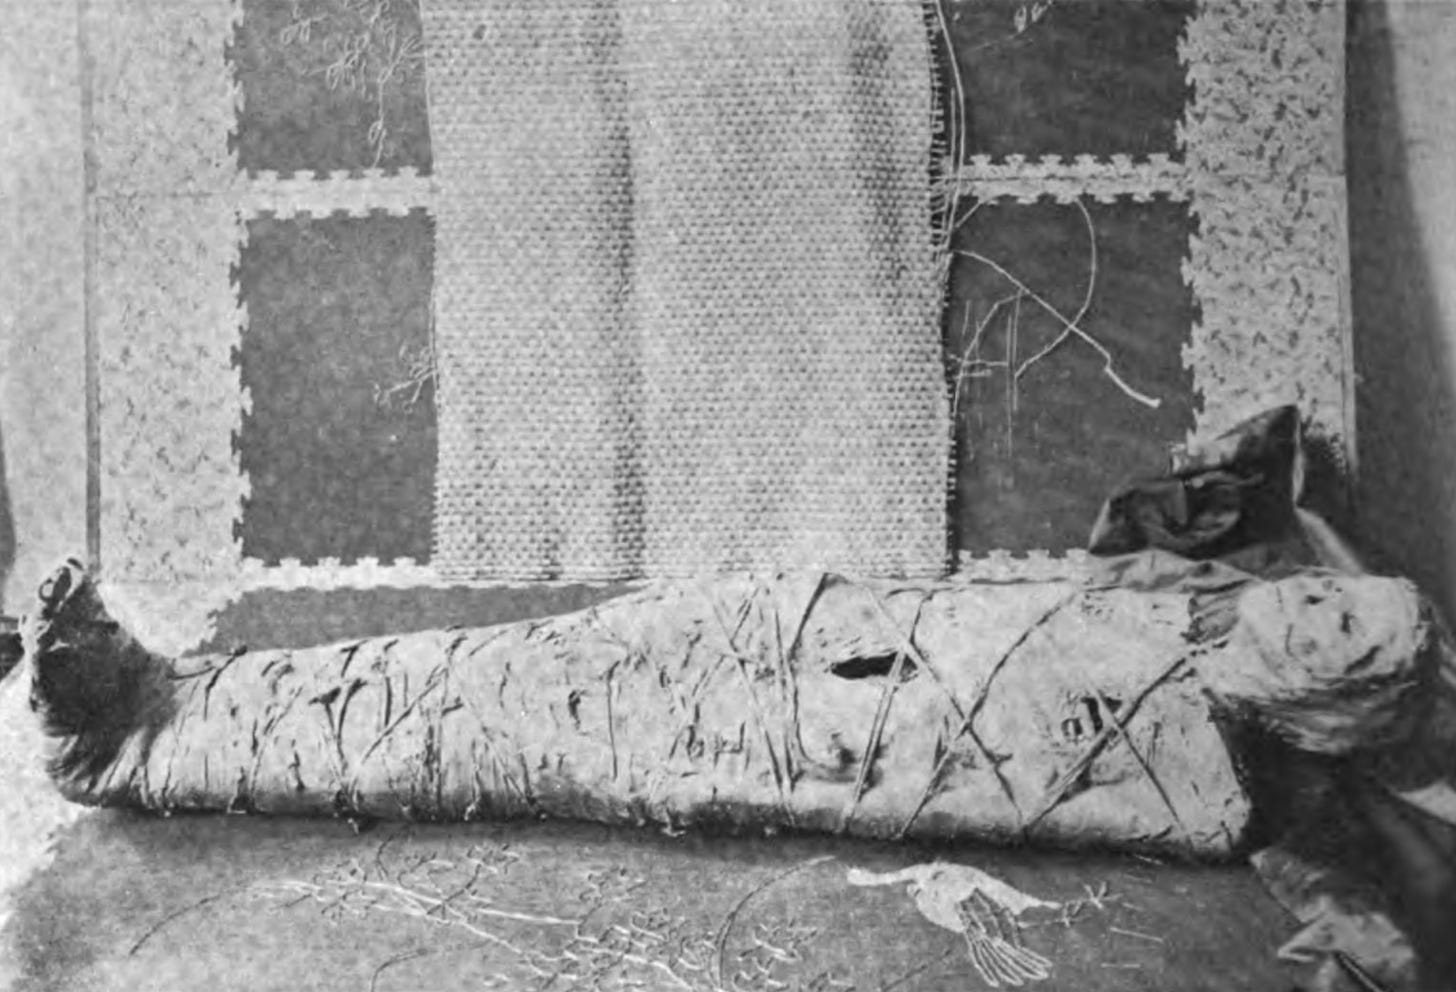 A wrapped mummy lies on either a table or the floor. It looks decayed and ancient.